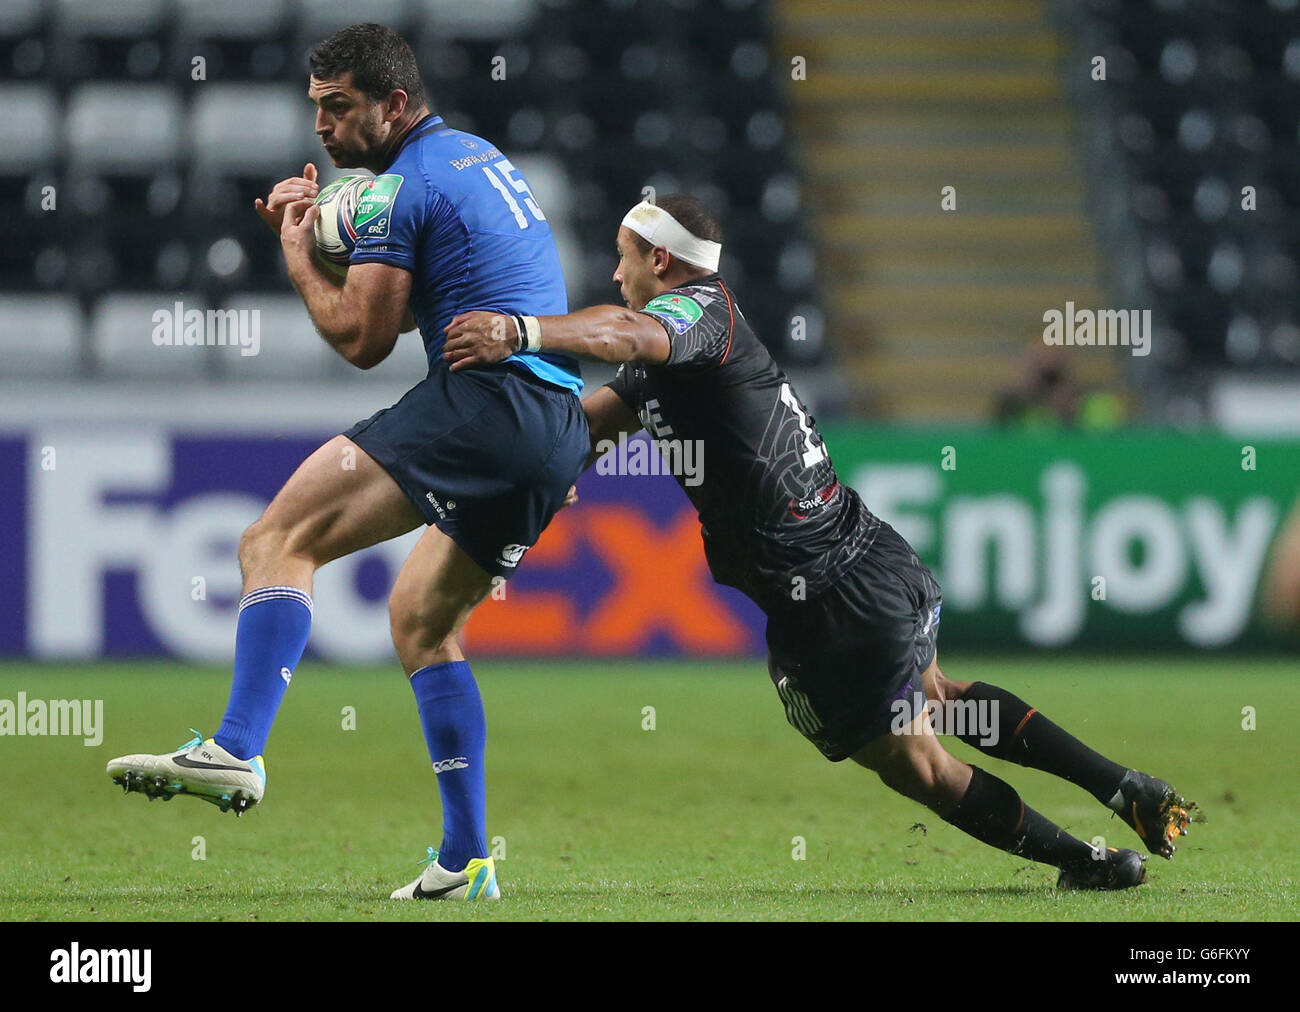 Leinster's Rob Kearney catches high ball as Ospreys's Eli Walker tackles, during the Heineken Cup match at the Liberty Stadium, Swansea. Stock Photo